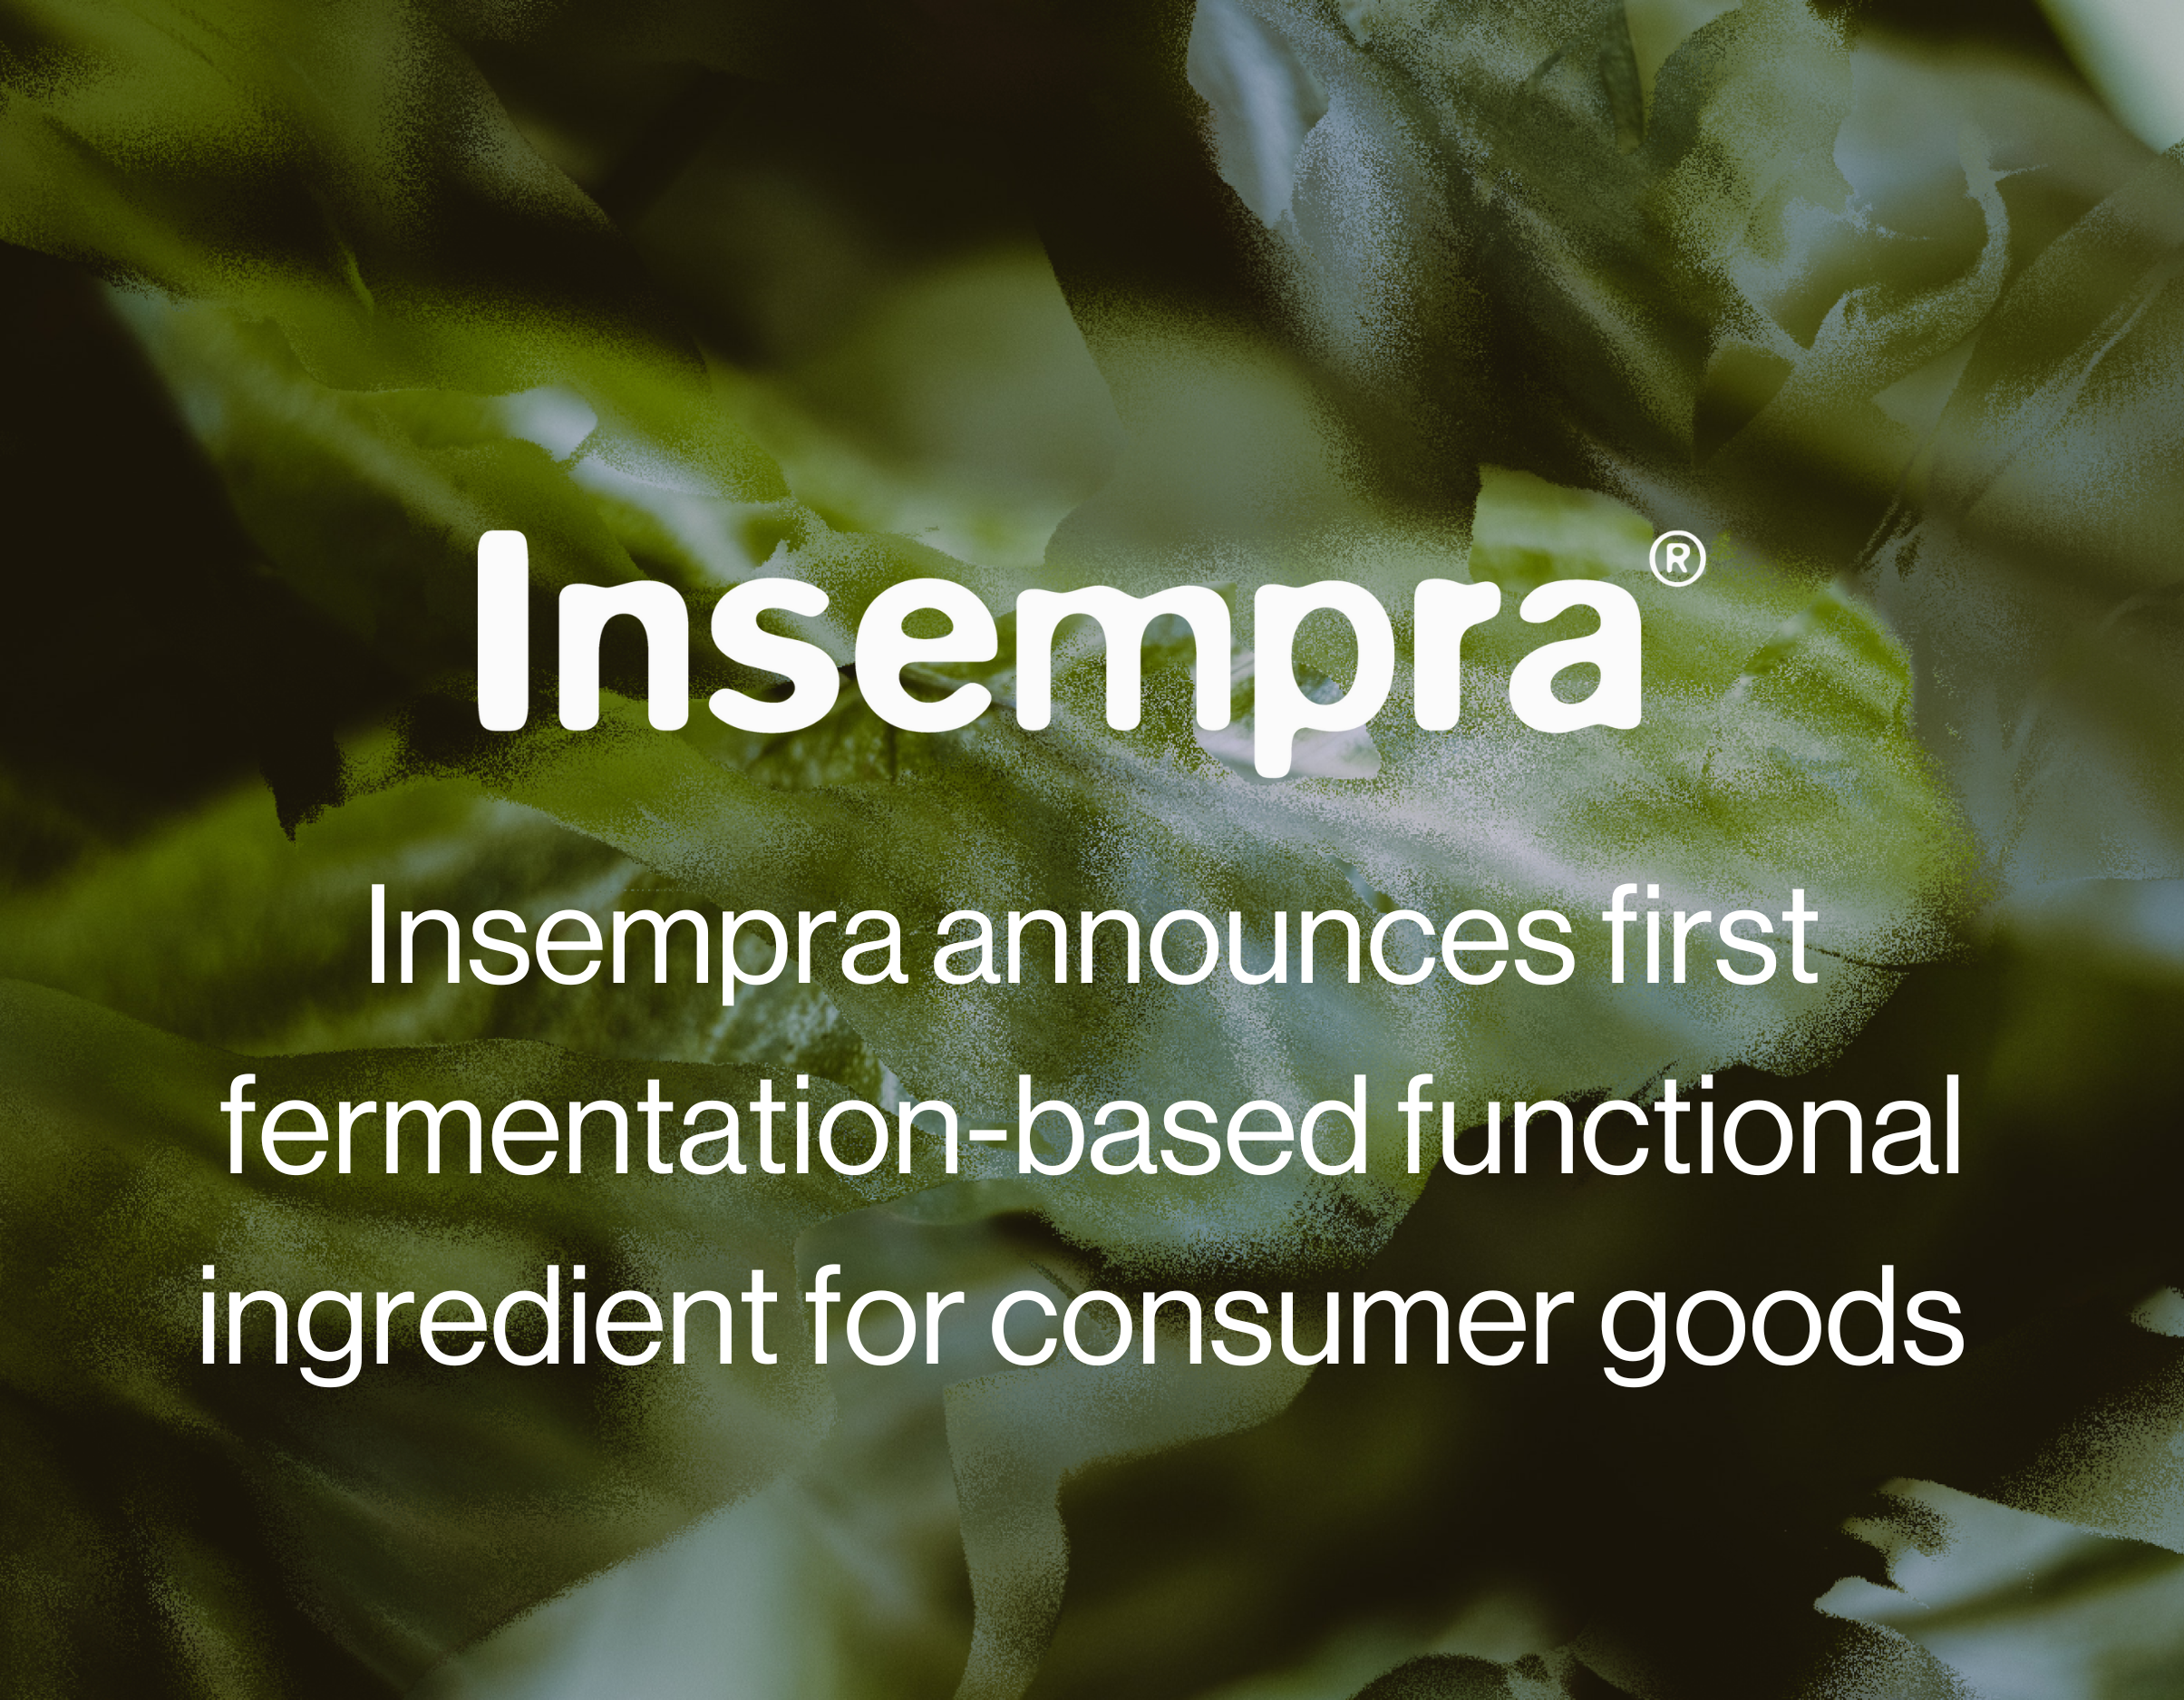 Insempra announces first fermentation-based functional ingredient for consumer goods